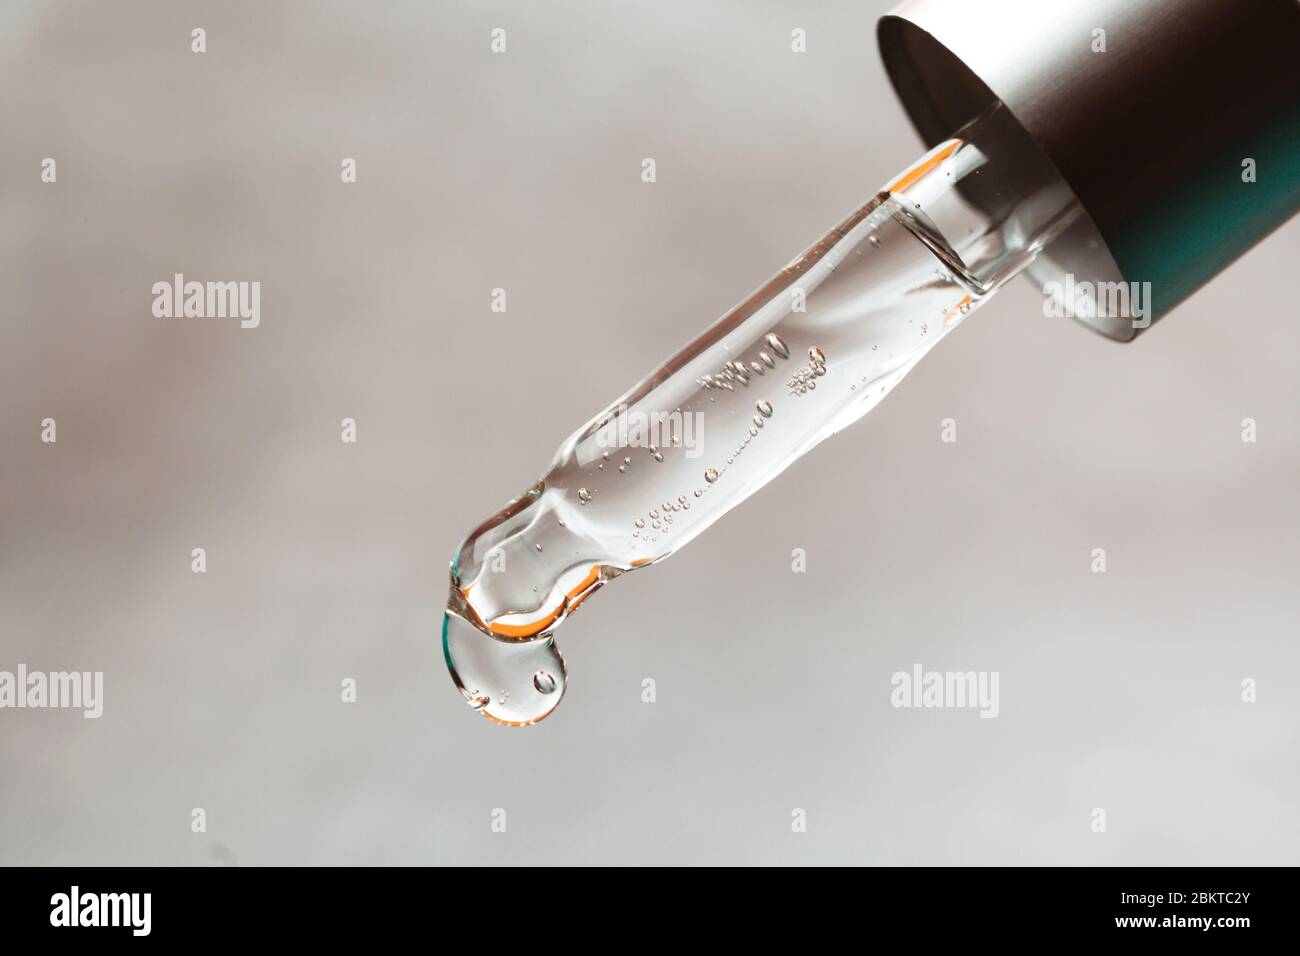 Pipette with drop of hyaluronic acid or serum, macro. Stock Photo